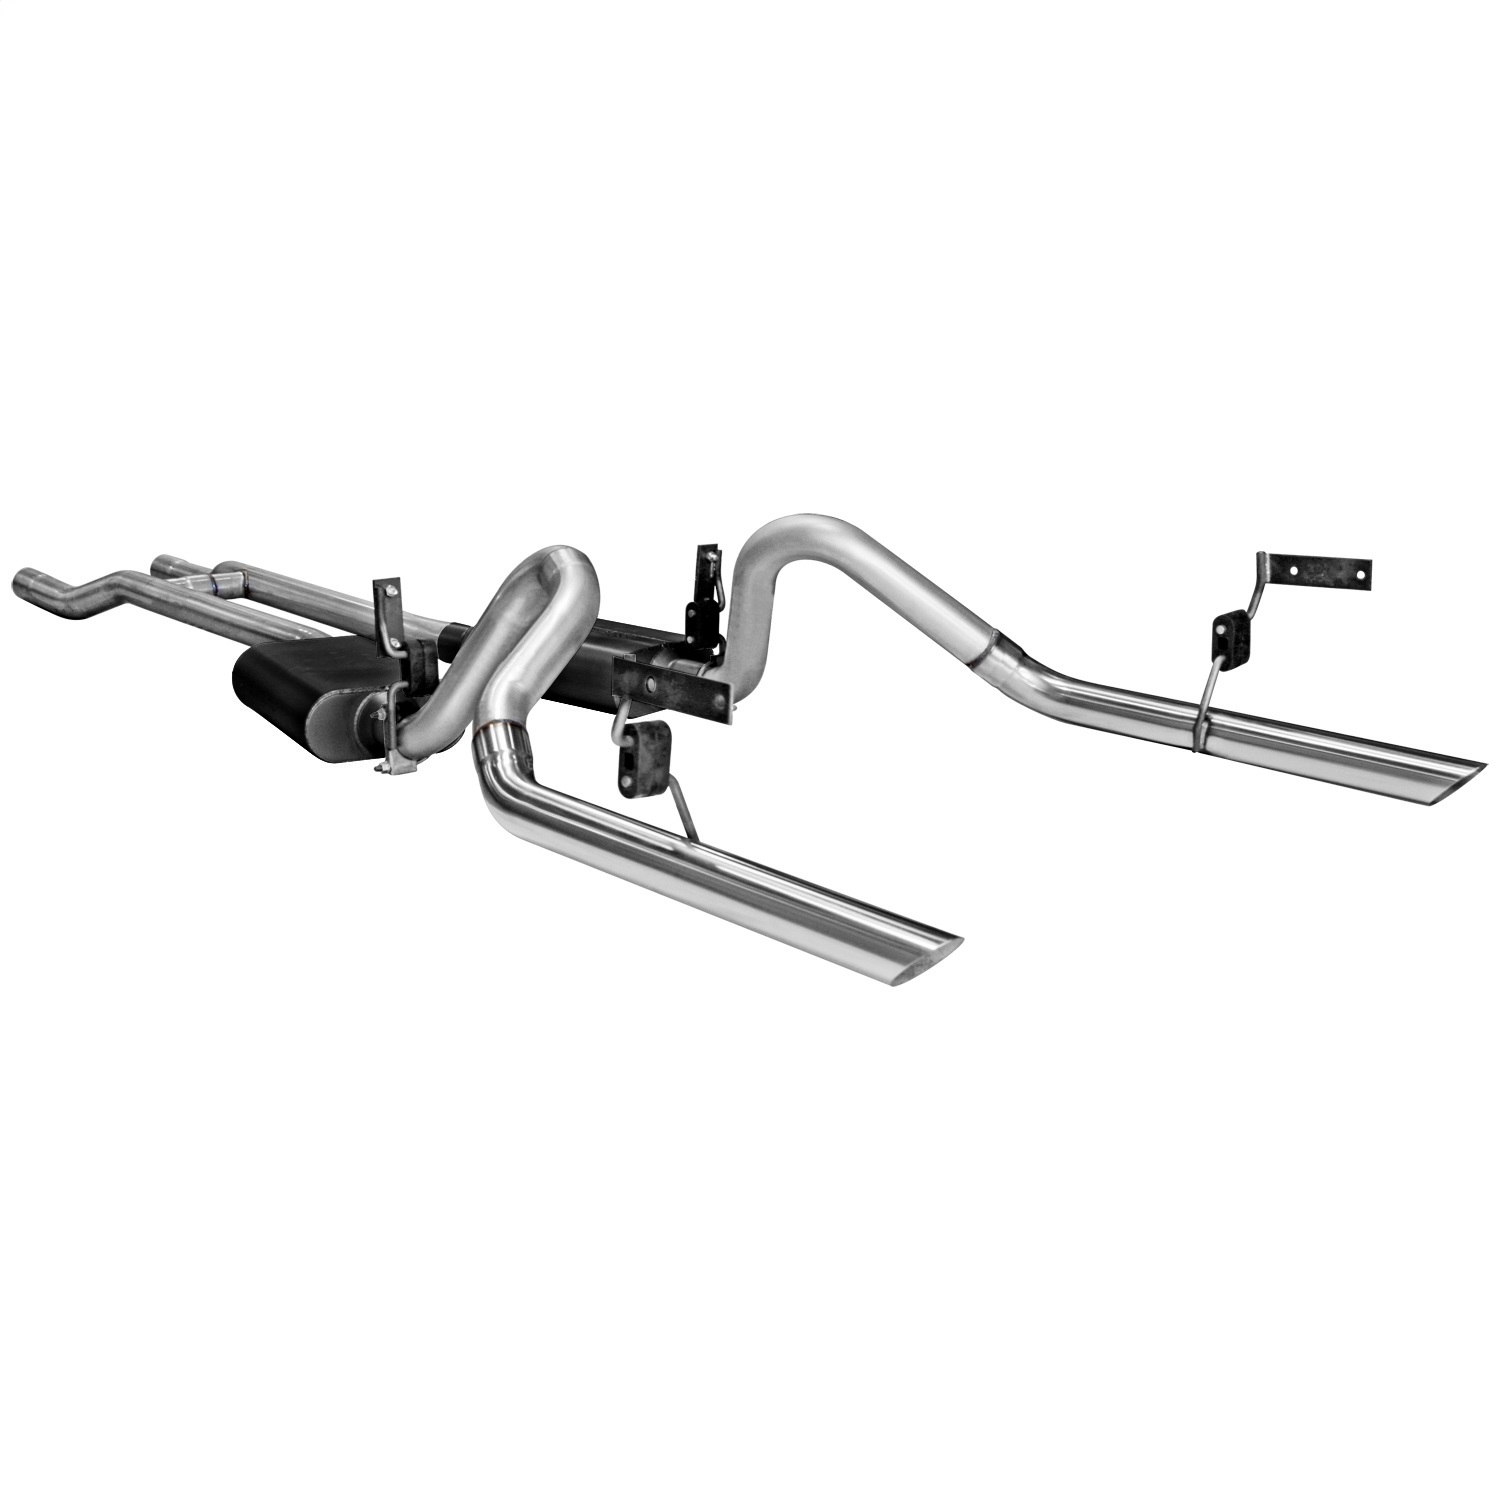 Flowmaster Flowmaster 17273 American Thunder Downpipe Back Exhaust System Fits Mustang